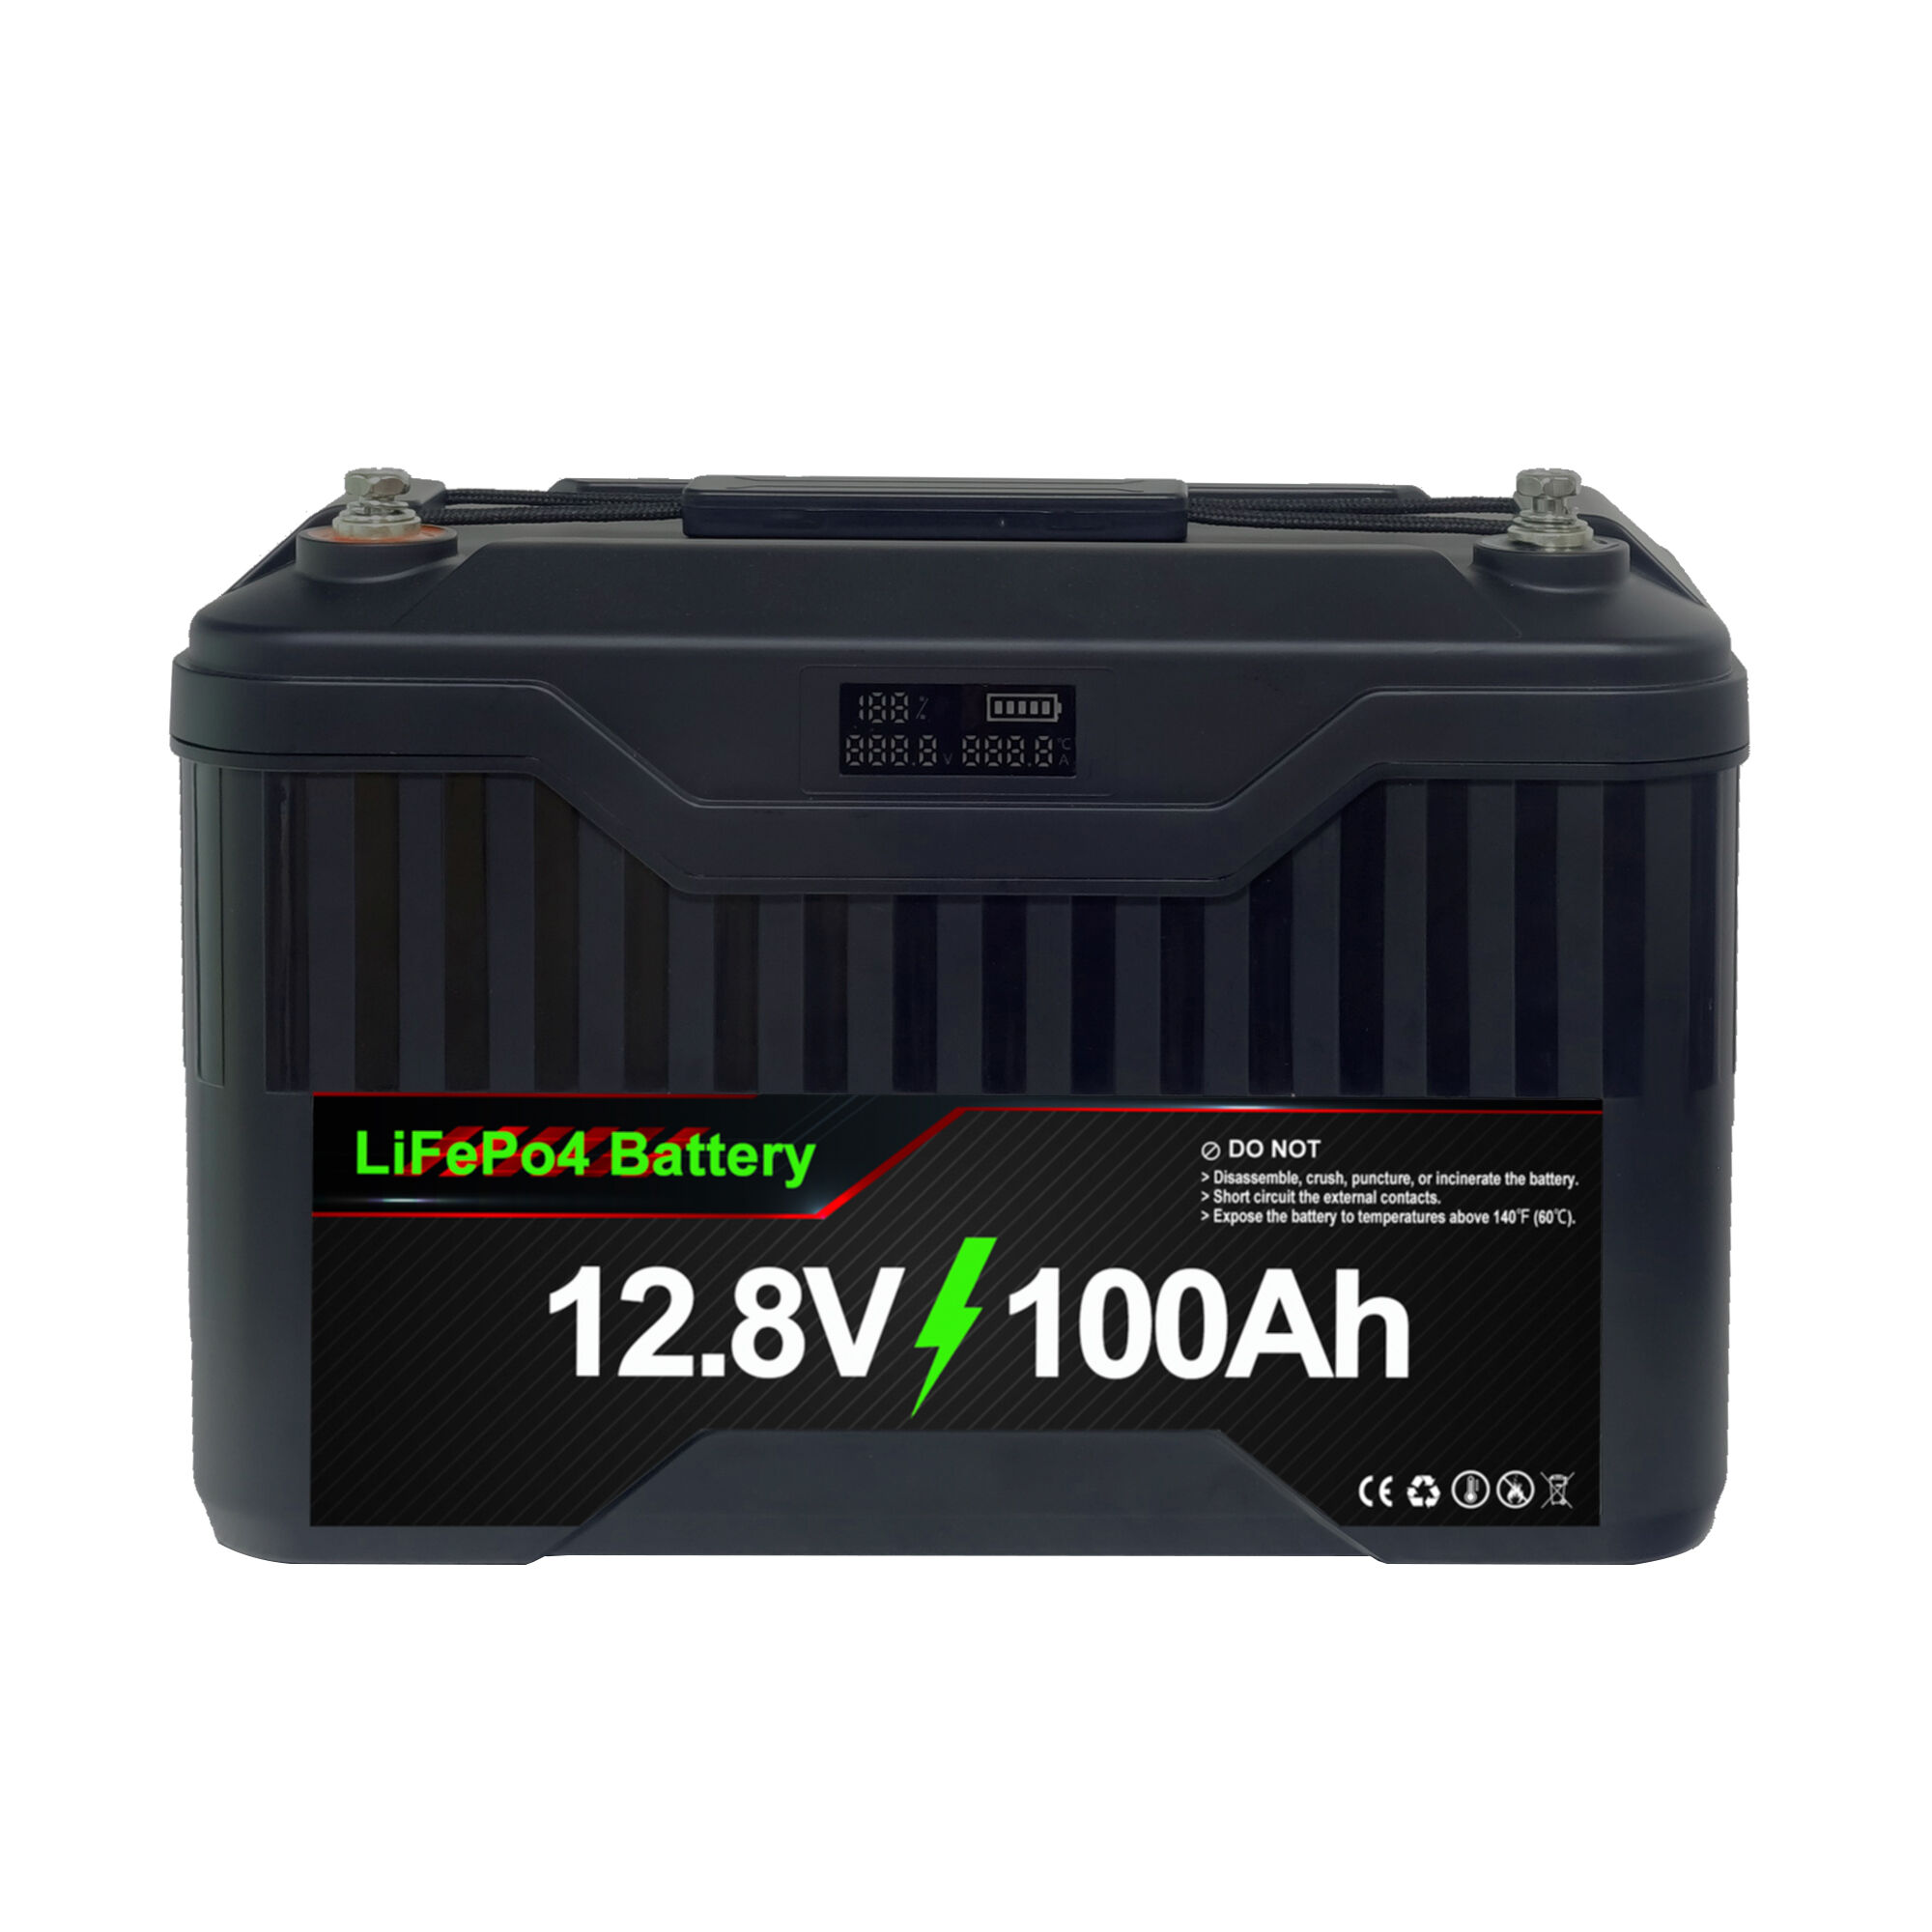  12v 60Ah LiFePO4 Battery Deep Cycle Lithium iron phosphate  Rechargeable Battery Built-in BMS Protect Charging and Discharging High  Performance for Golf Cart EV RV Solar Energy Storage Battery… : Automotive